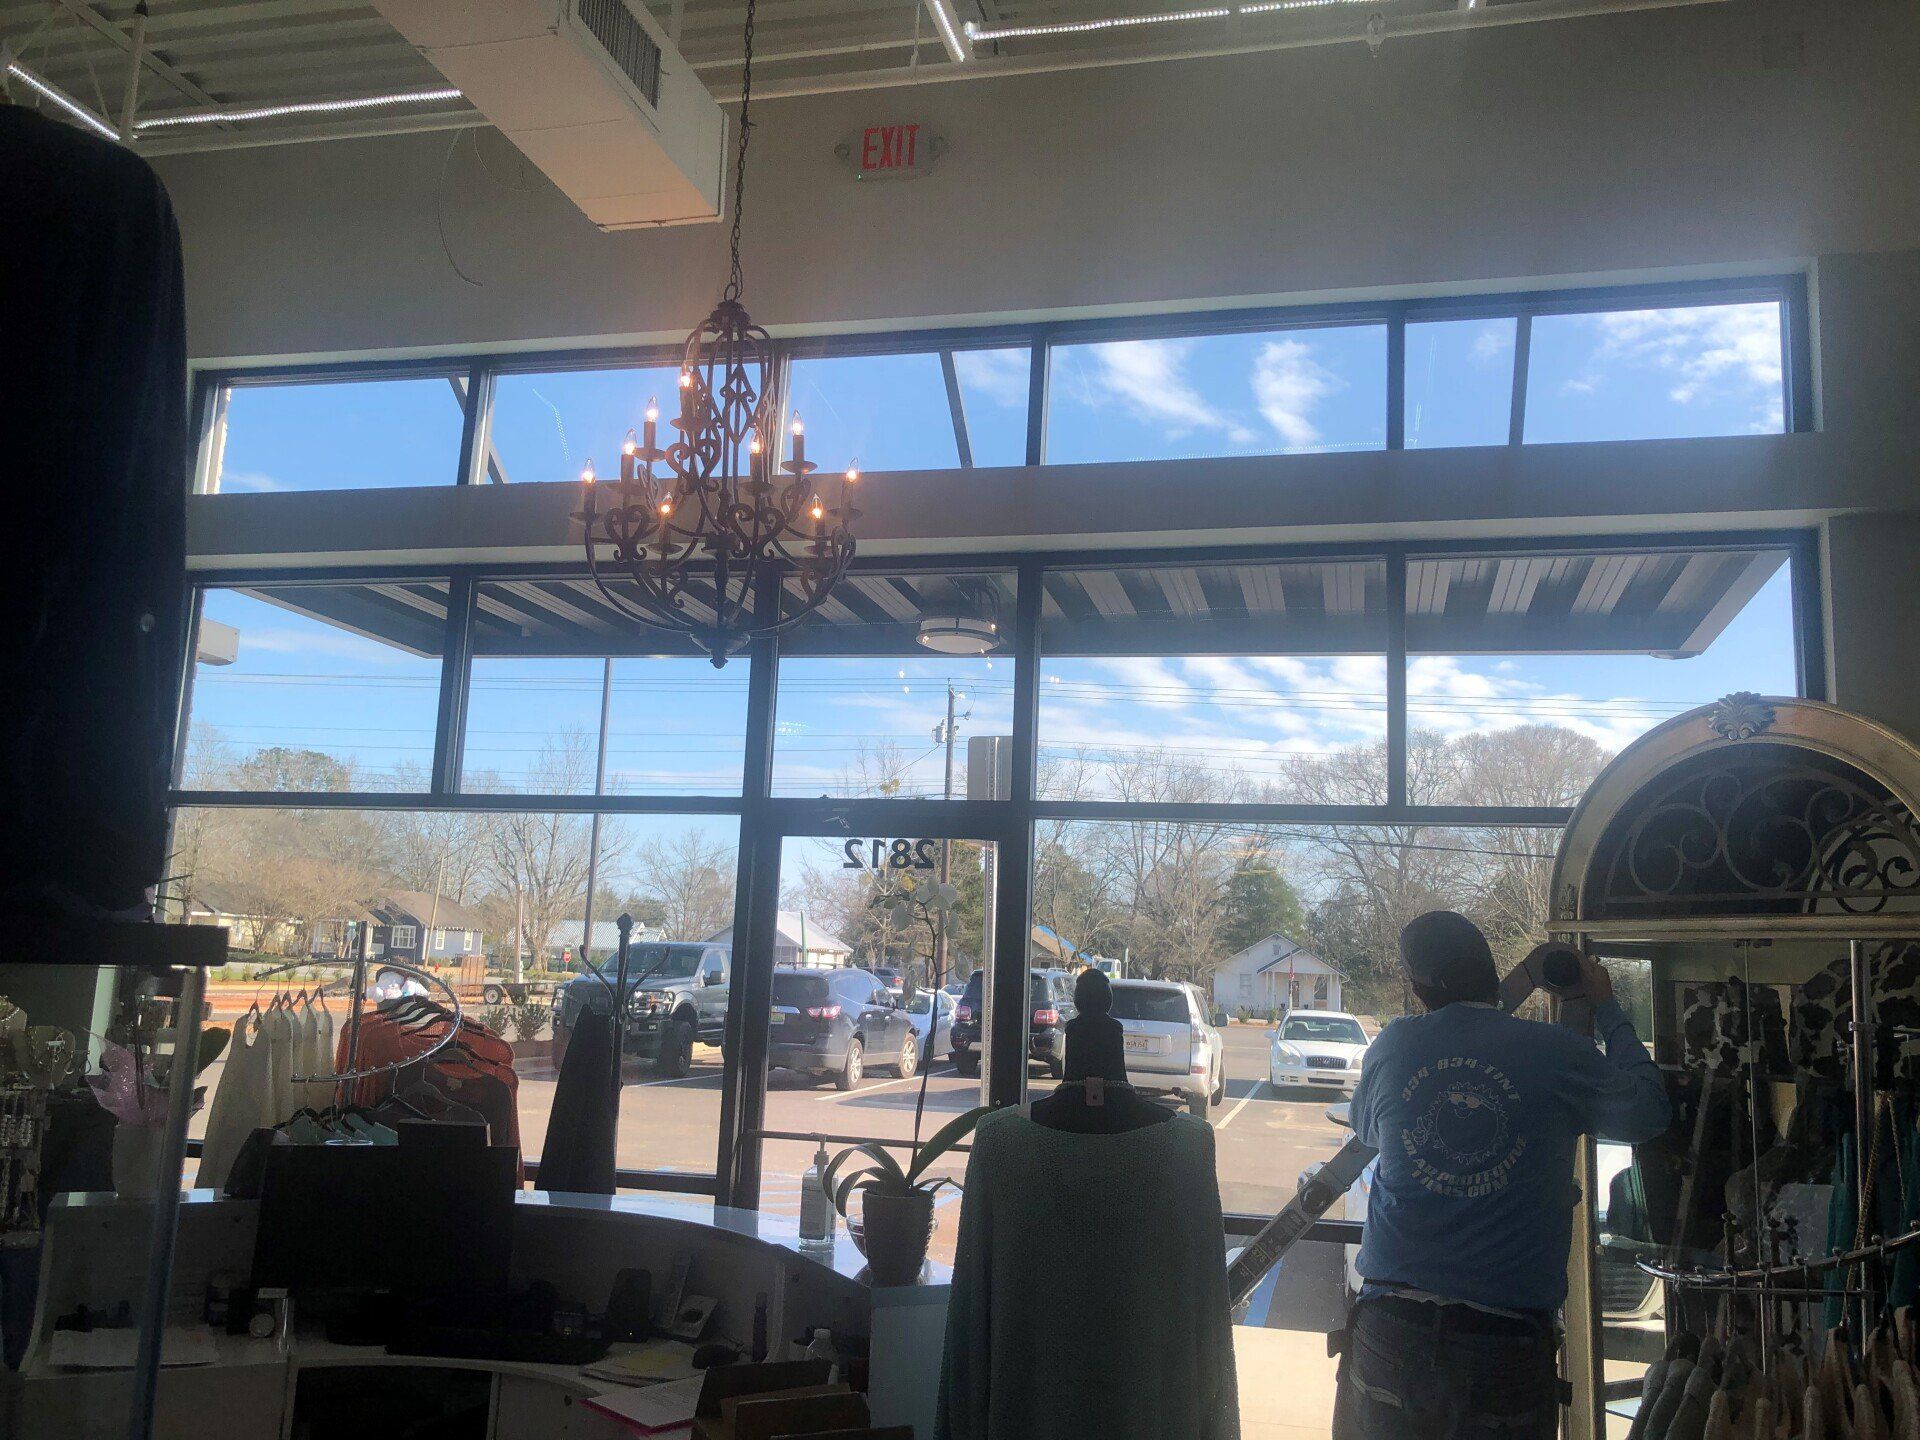 Store window tinting in Opelika AL - Bright UV Sun glare was cut with SPF storefront Tint in Opelika, AL